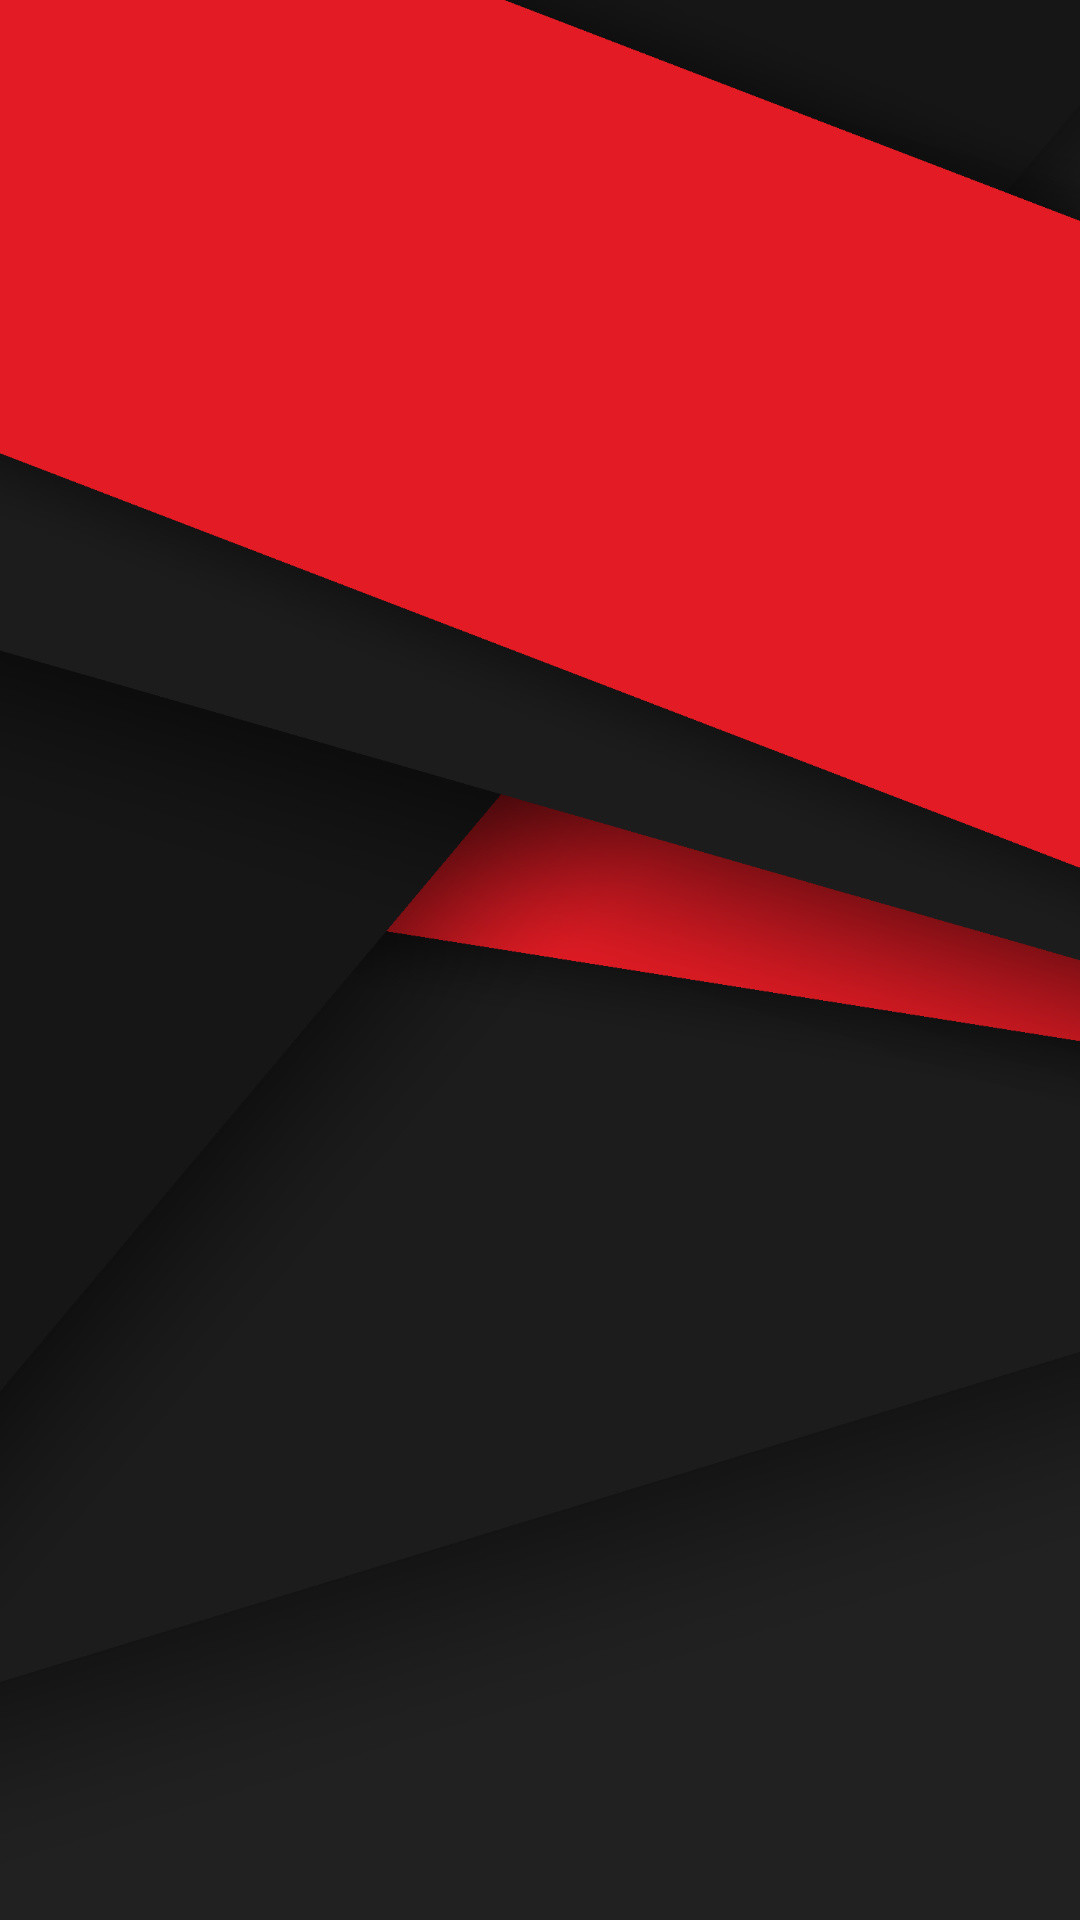 1080x1920 Red And Black Material Design Mobile HD Wallpaper